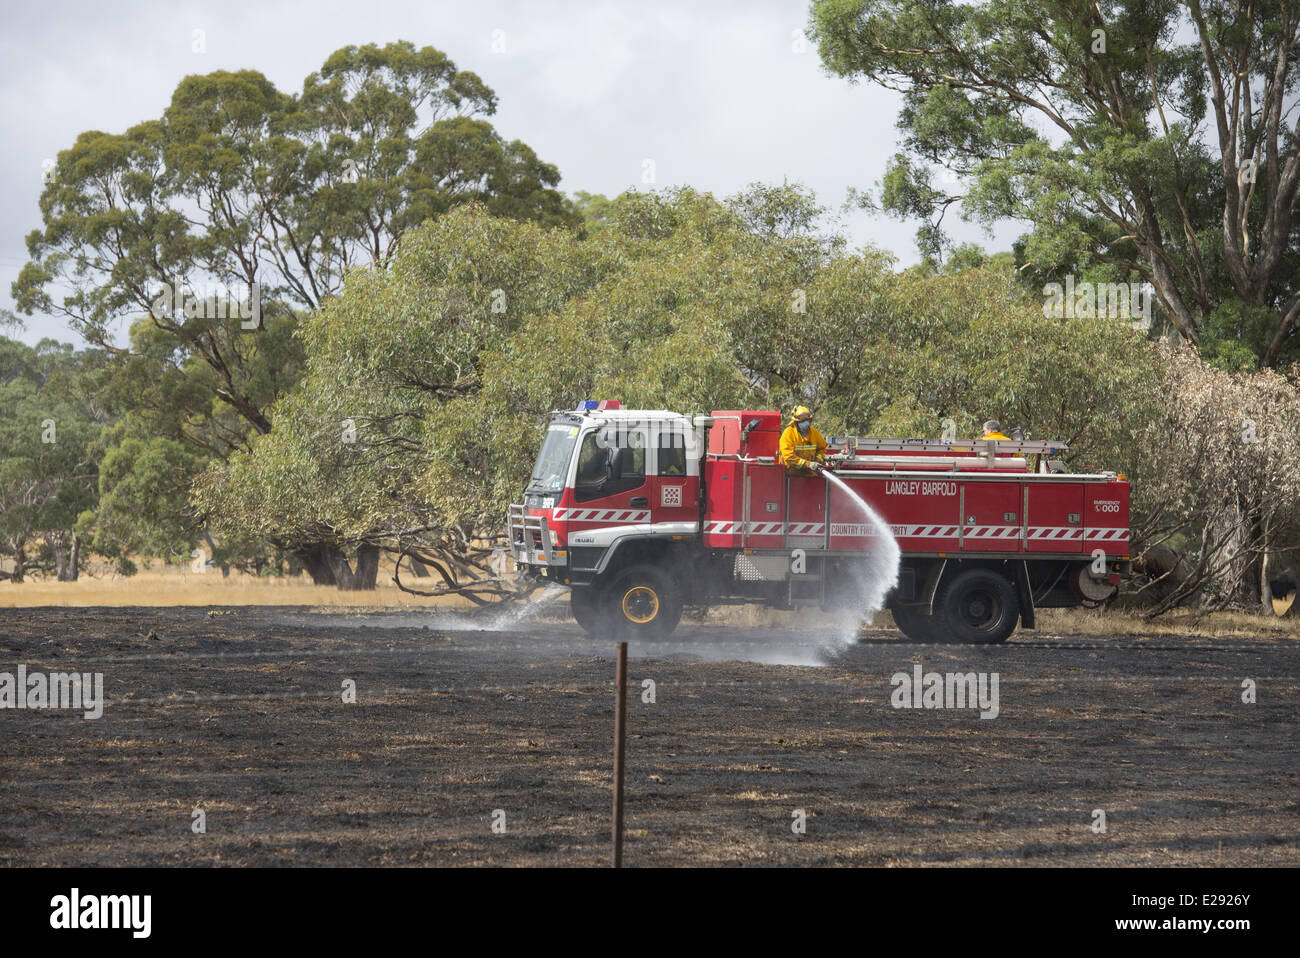 country-fire-authority-firemen-putting-out-grass-fire-langley-victoria-australia-february